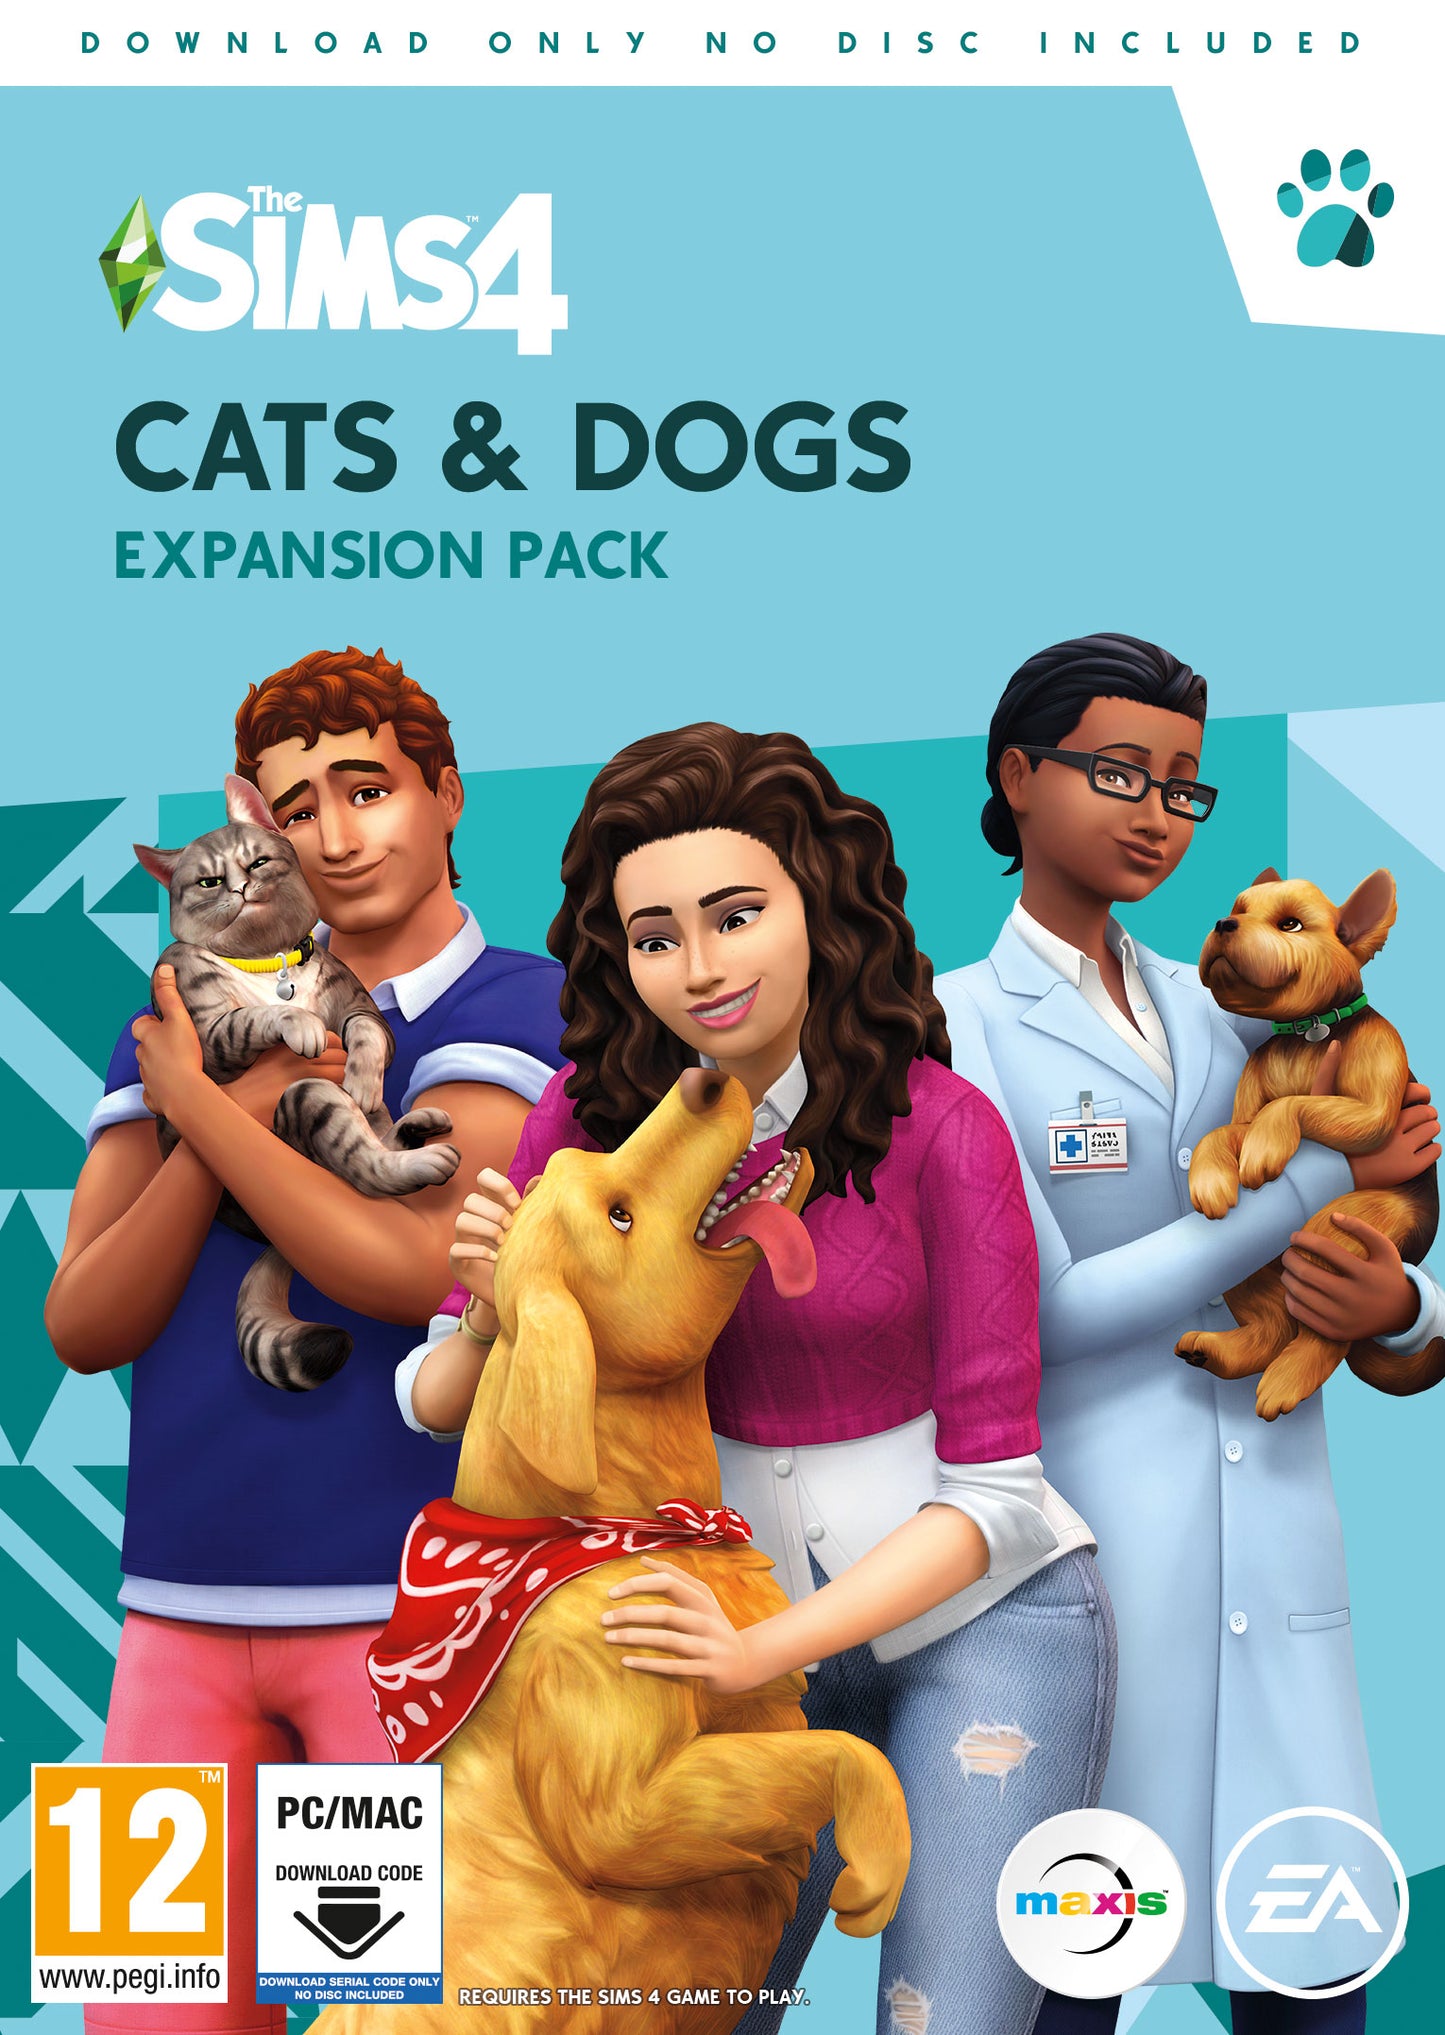 The Sims 4 Cats & Dogs Expansion pack for PC